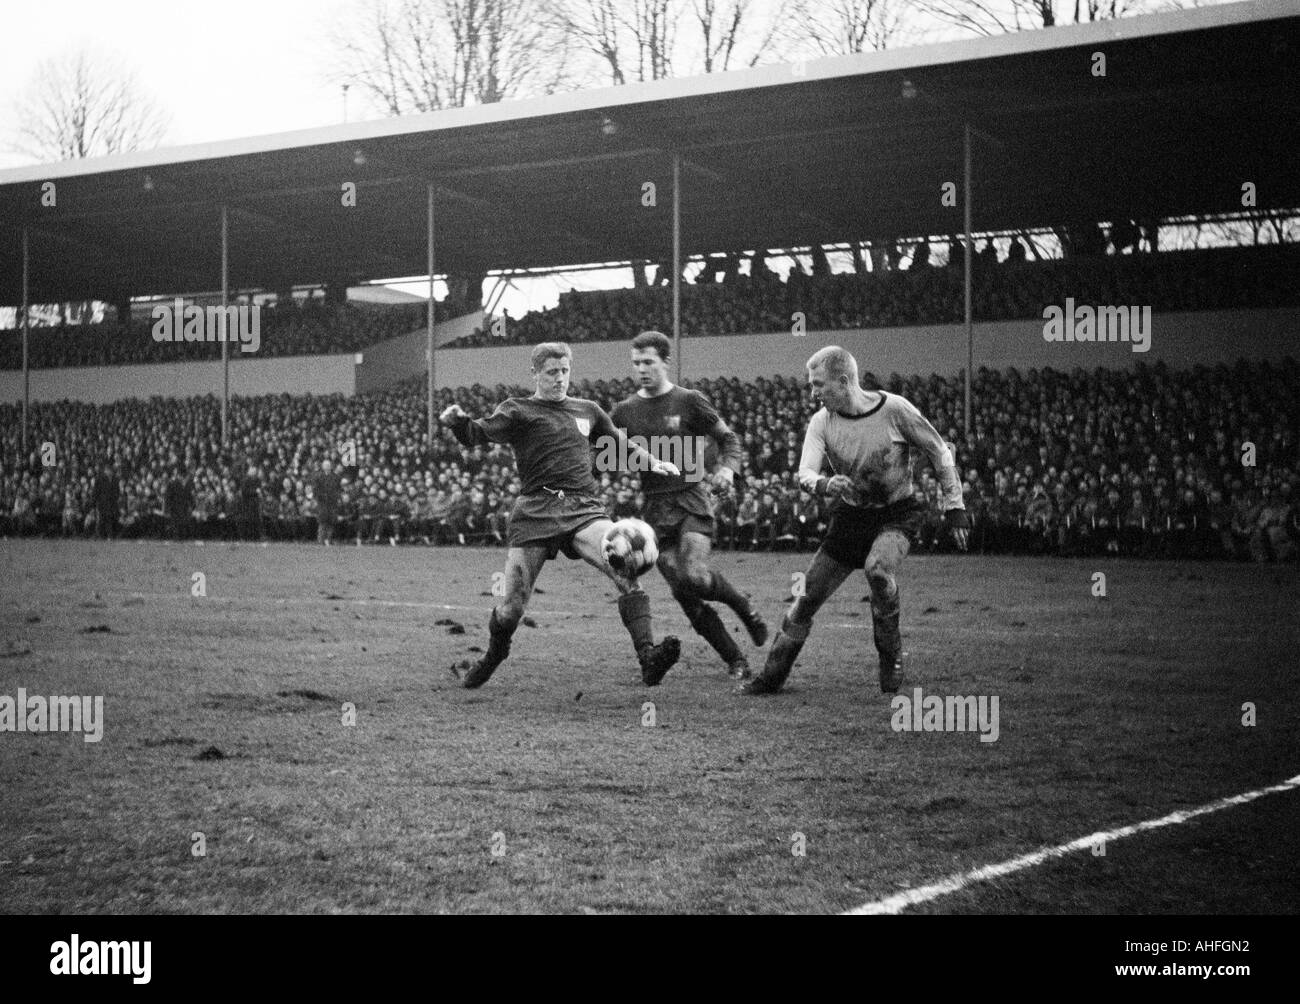 Fc bayern Black and White Stock Photos & Images - Alamy